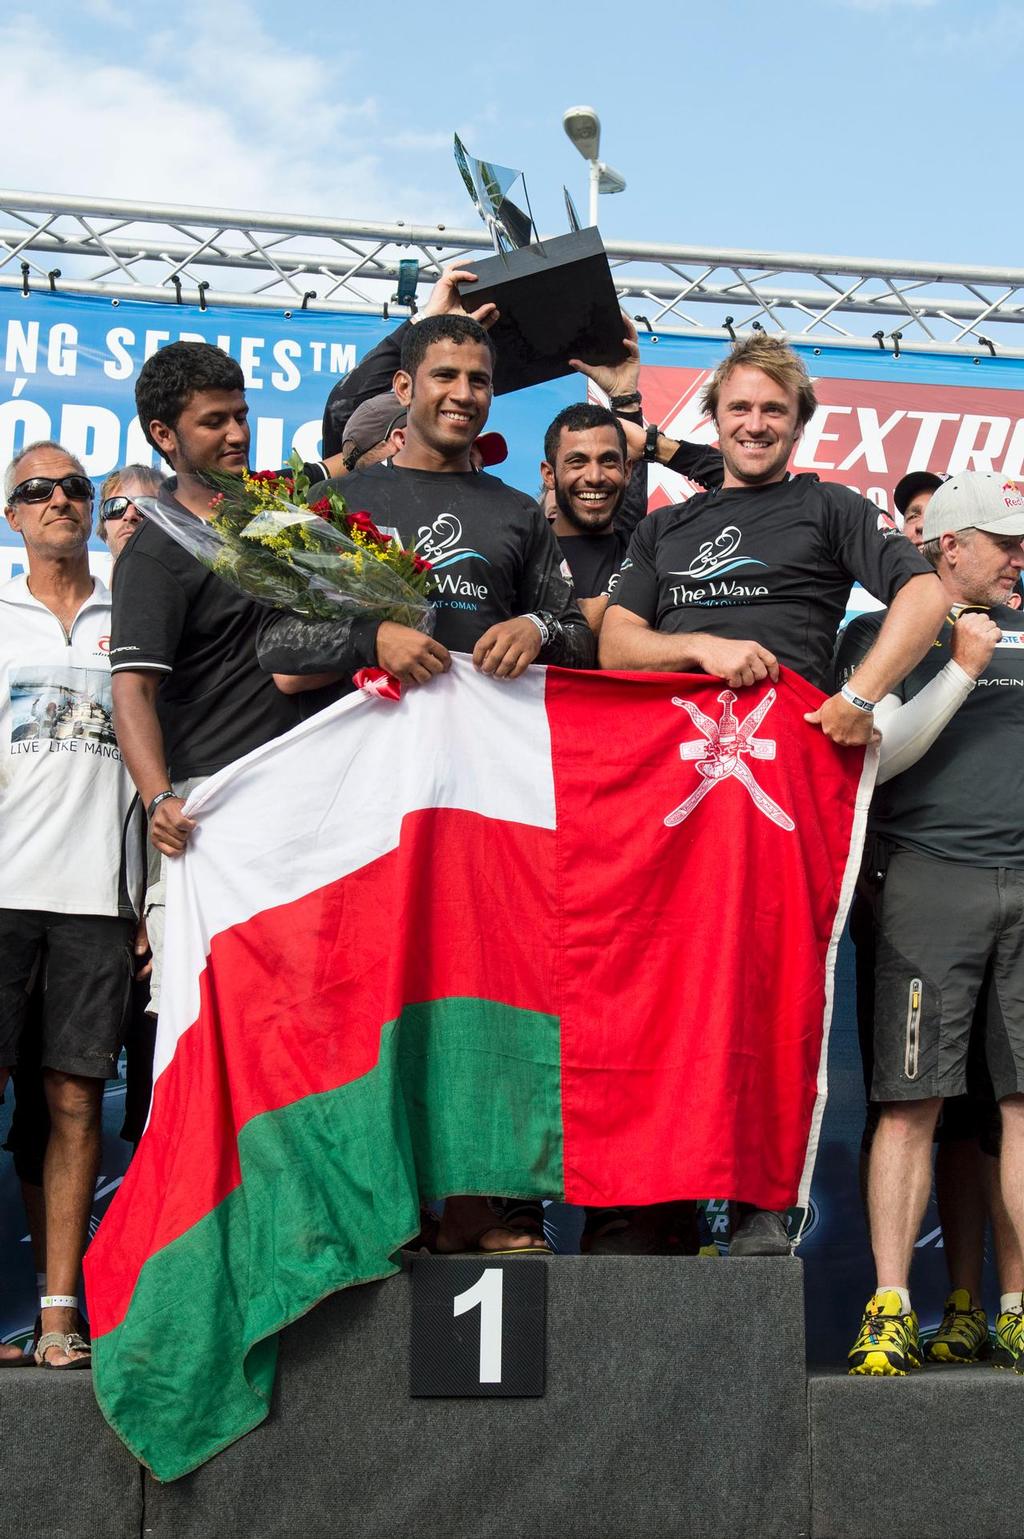 Extreme Sailing Series Act 8 - The Wave Muscat skippered by Leigh McMillan (GBR), mainsail trimmer Pete Greenhalgh (GBR), headsail trimmer Musab Al Hadi (OMA), tactician Ed Smyth (NZL) and bowman Hashim Al Rashdi (OMA)<br />
Winner ©  Vincent Curutchet / Lloyd images / OC http://www.lloydimages.com/